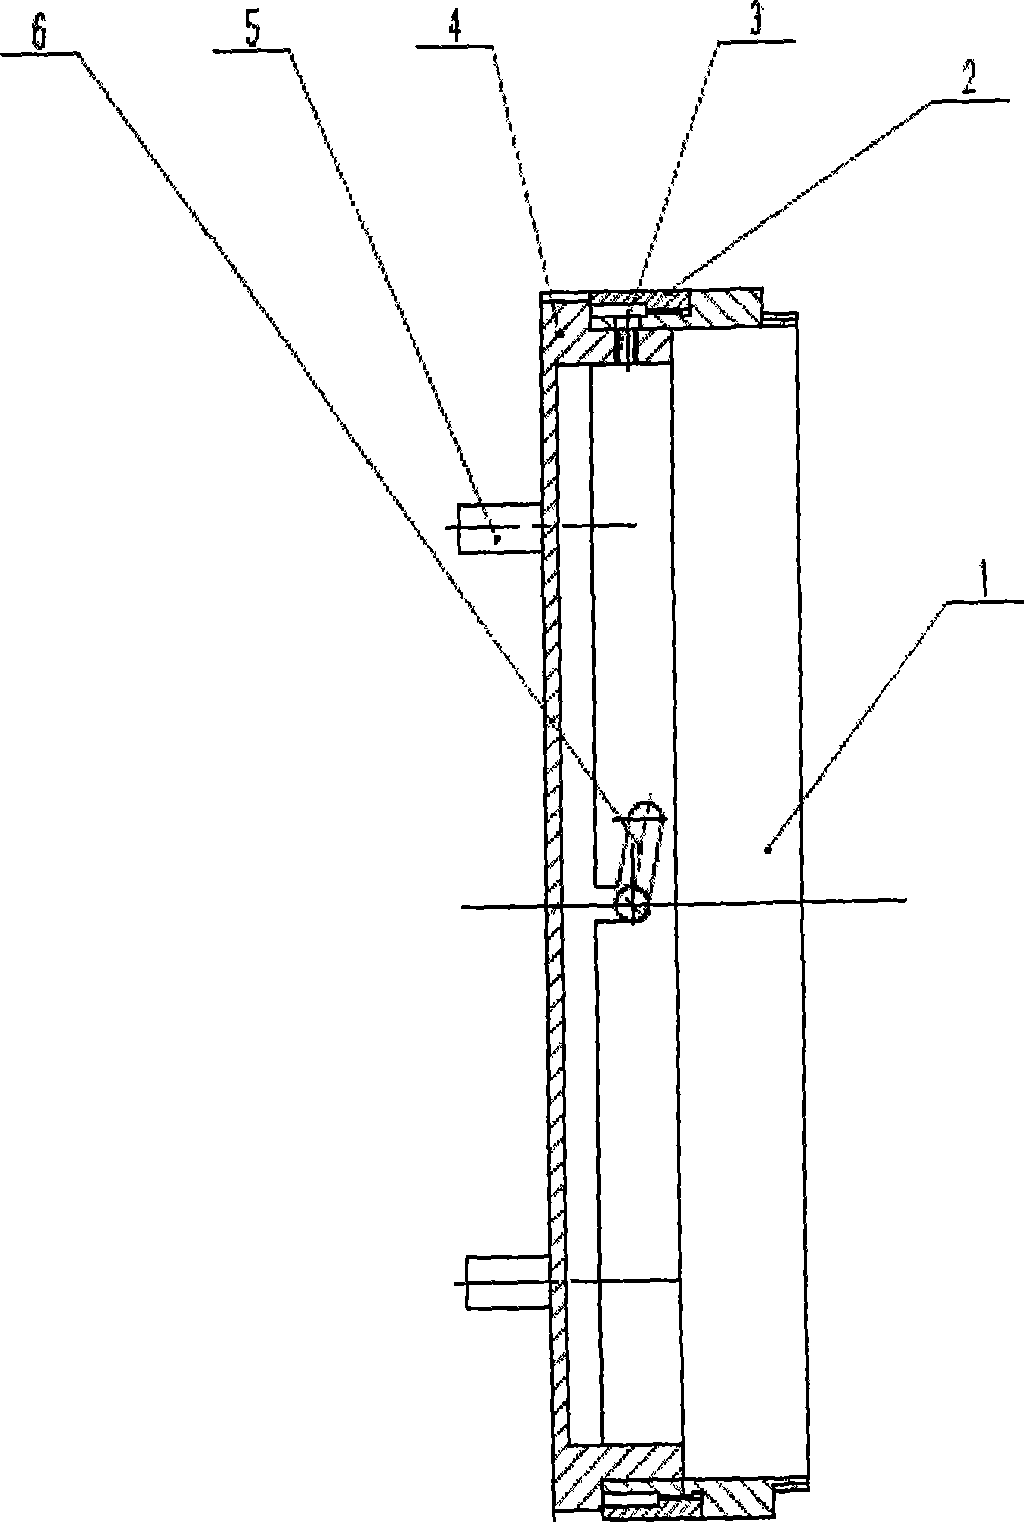 Fastening lens cover device